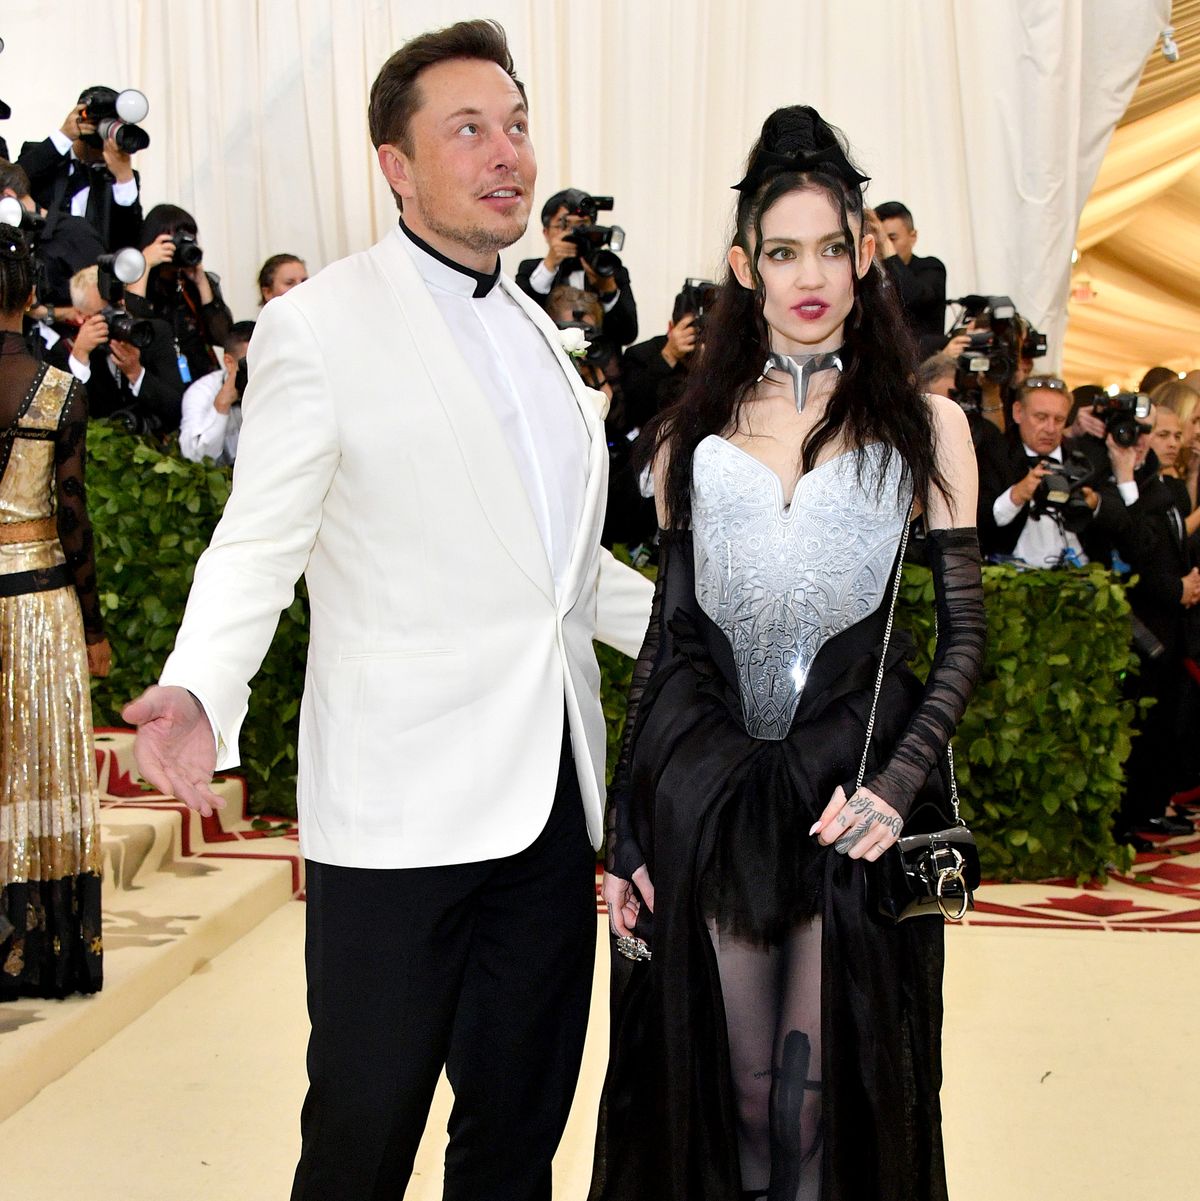 new york, ny   may 07  elon musk and grimes attend the heavenly bodies fashion  the catholic imagination costume institute gala at the metropolitan museum of art on may 7, 2018 in new york city  photo by dia dipasupilwireimage